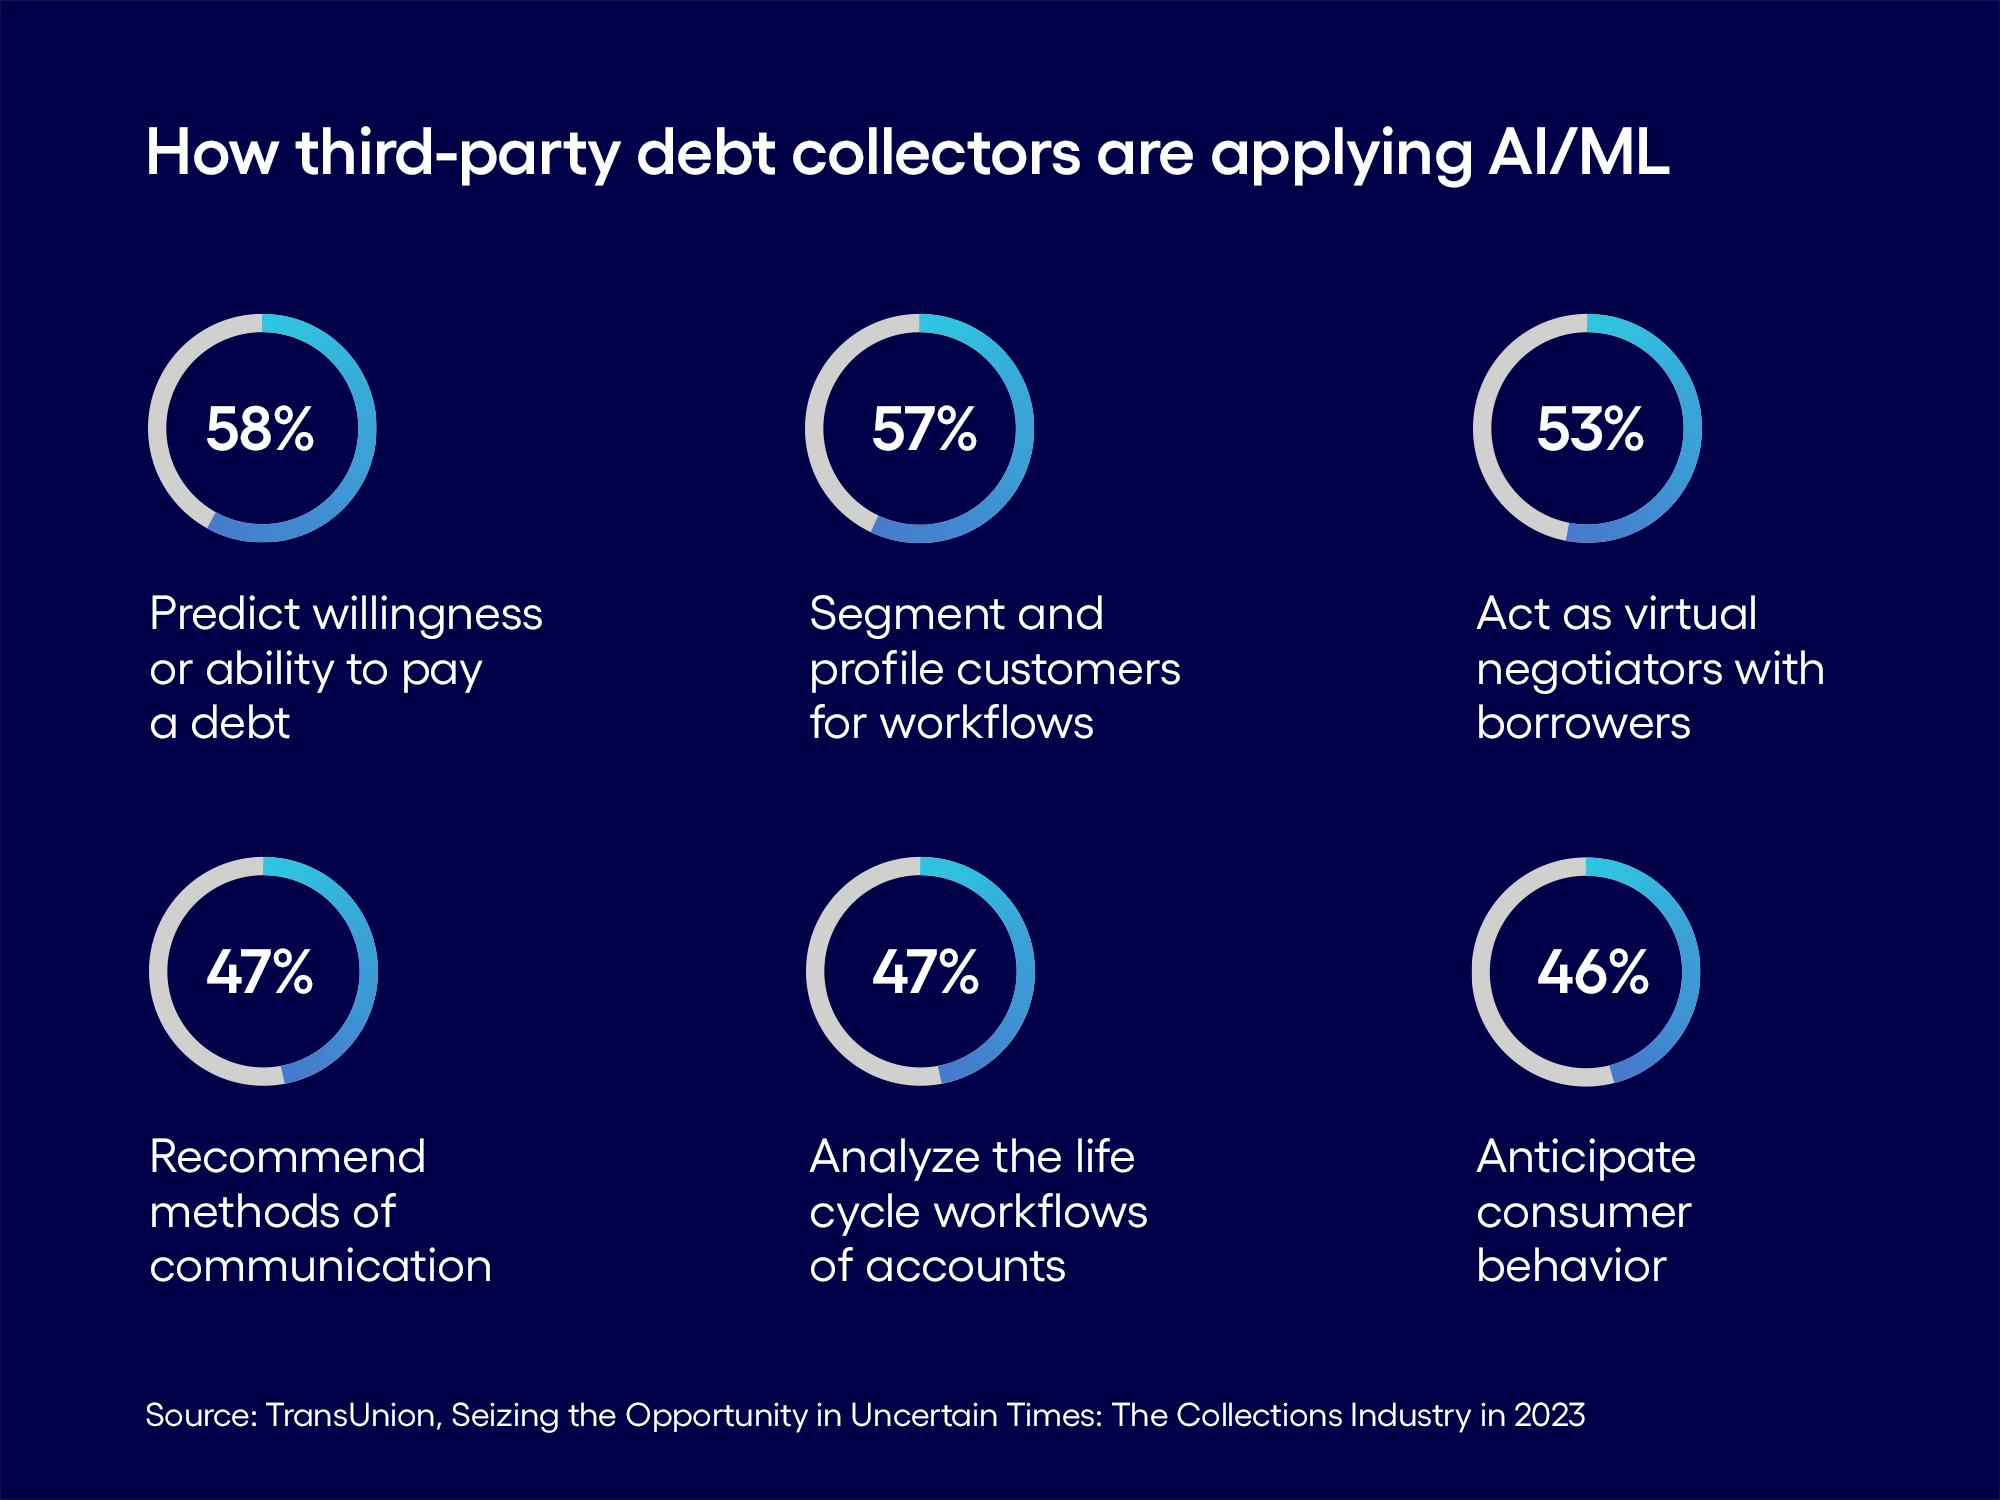 How third-party debt collectors are applying AI/ML